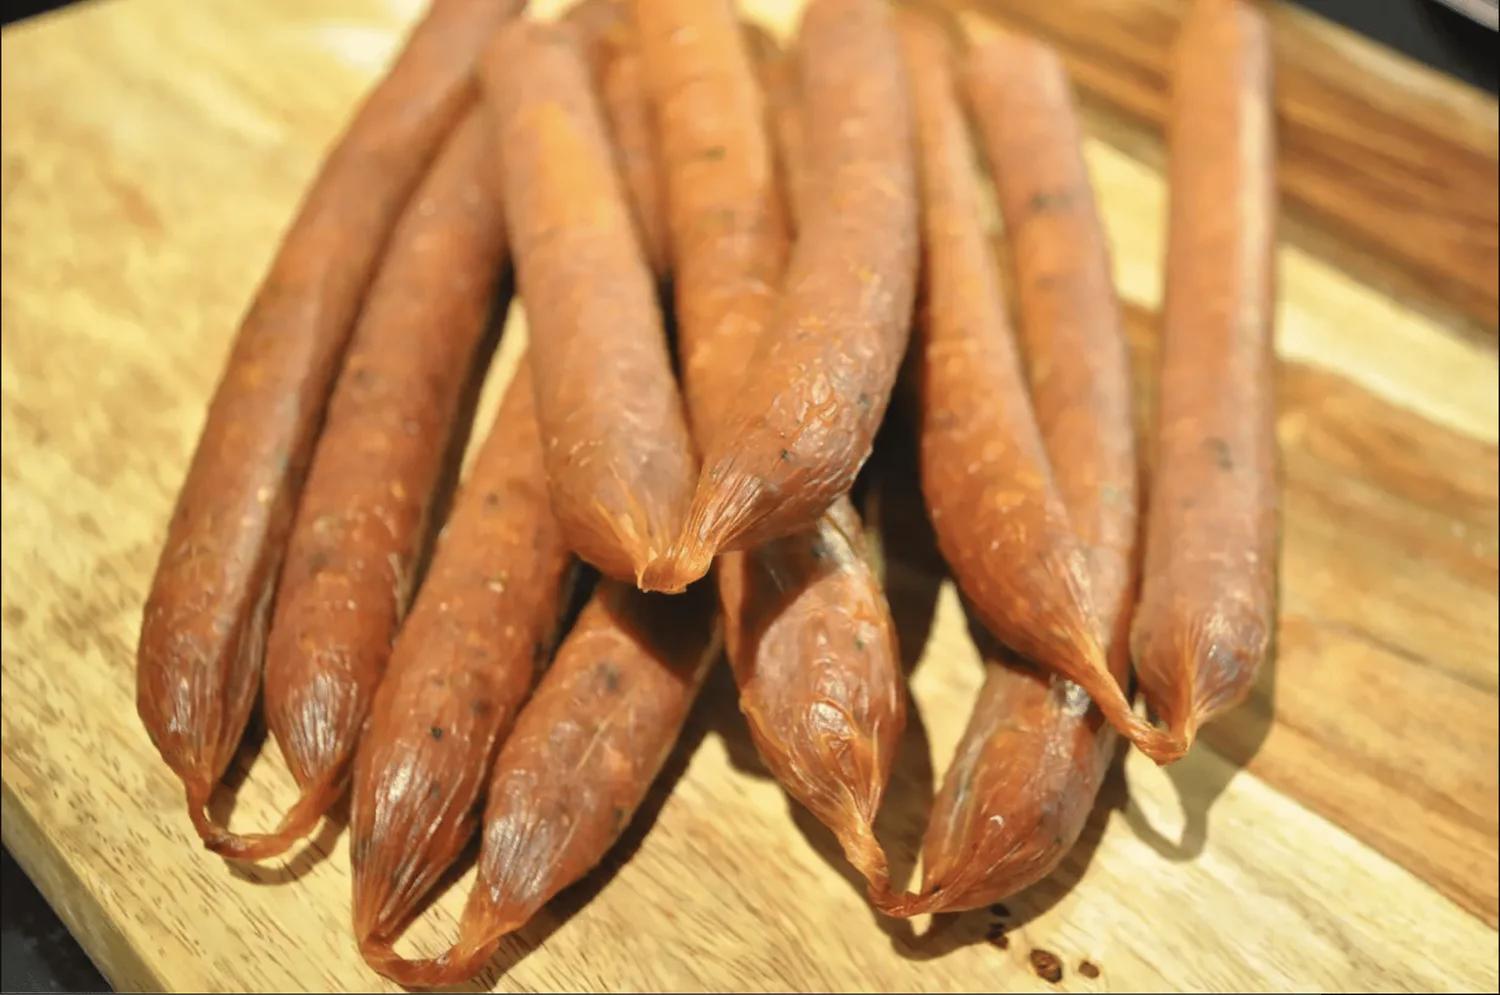 smoked pepperoni sticks - What are pepperoni sticks made of